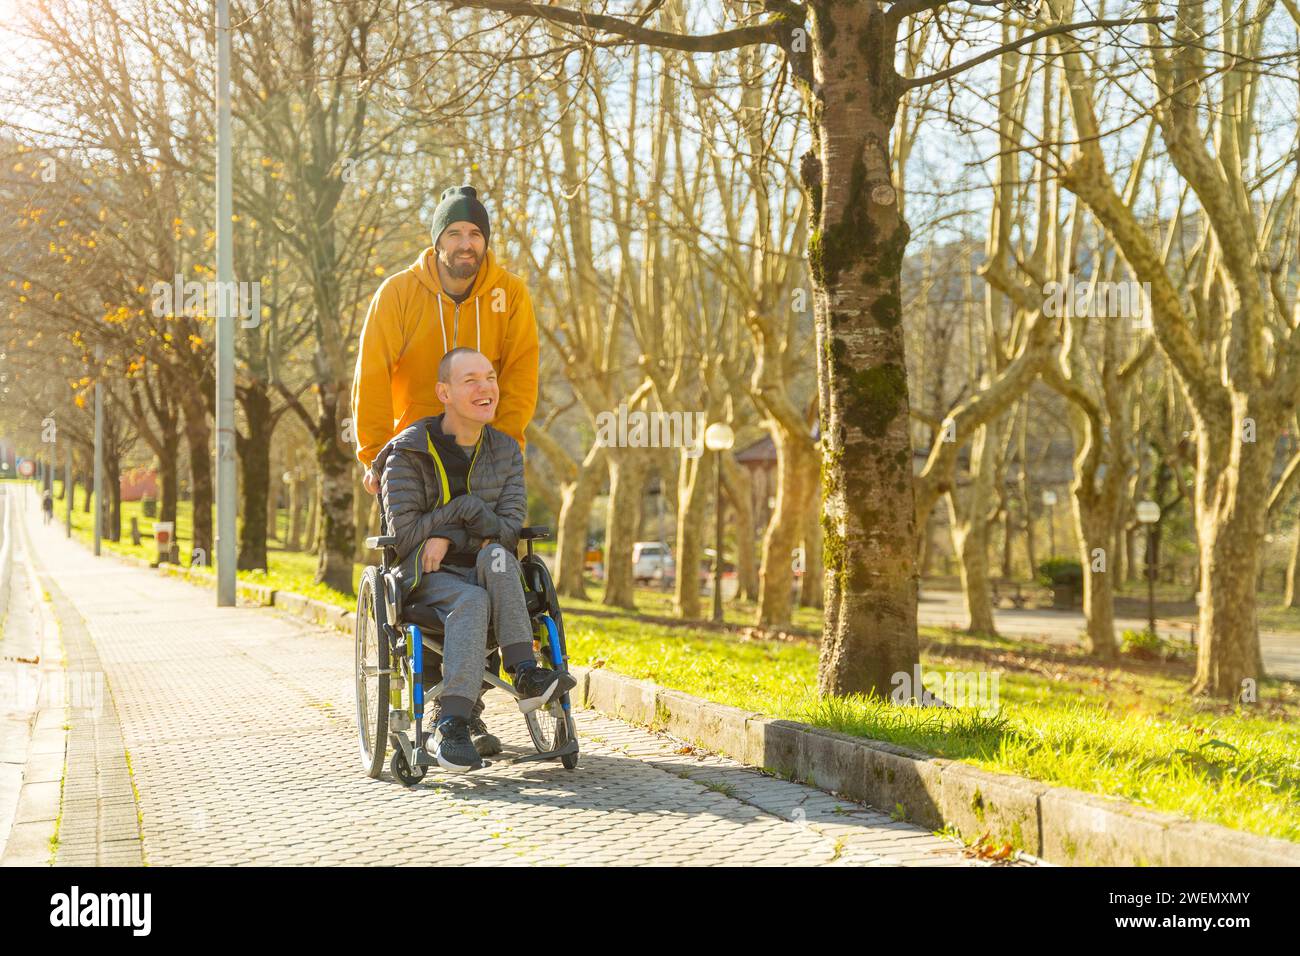 Disabled man and friend along a path in a park during a sunny day of winter Stock Photo